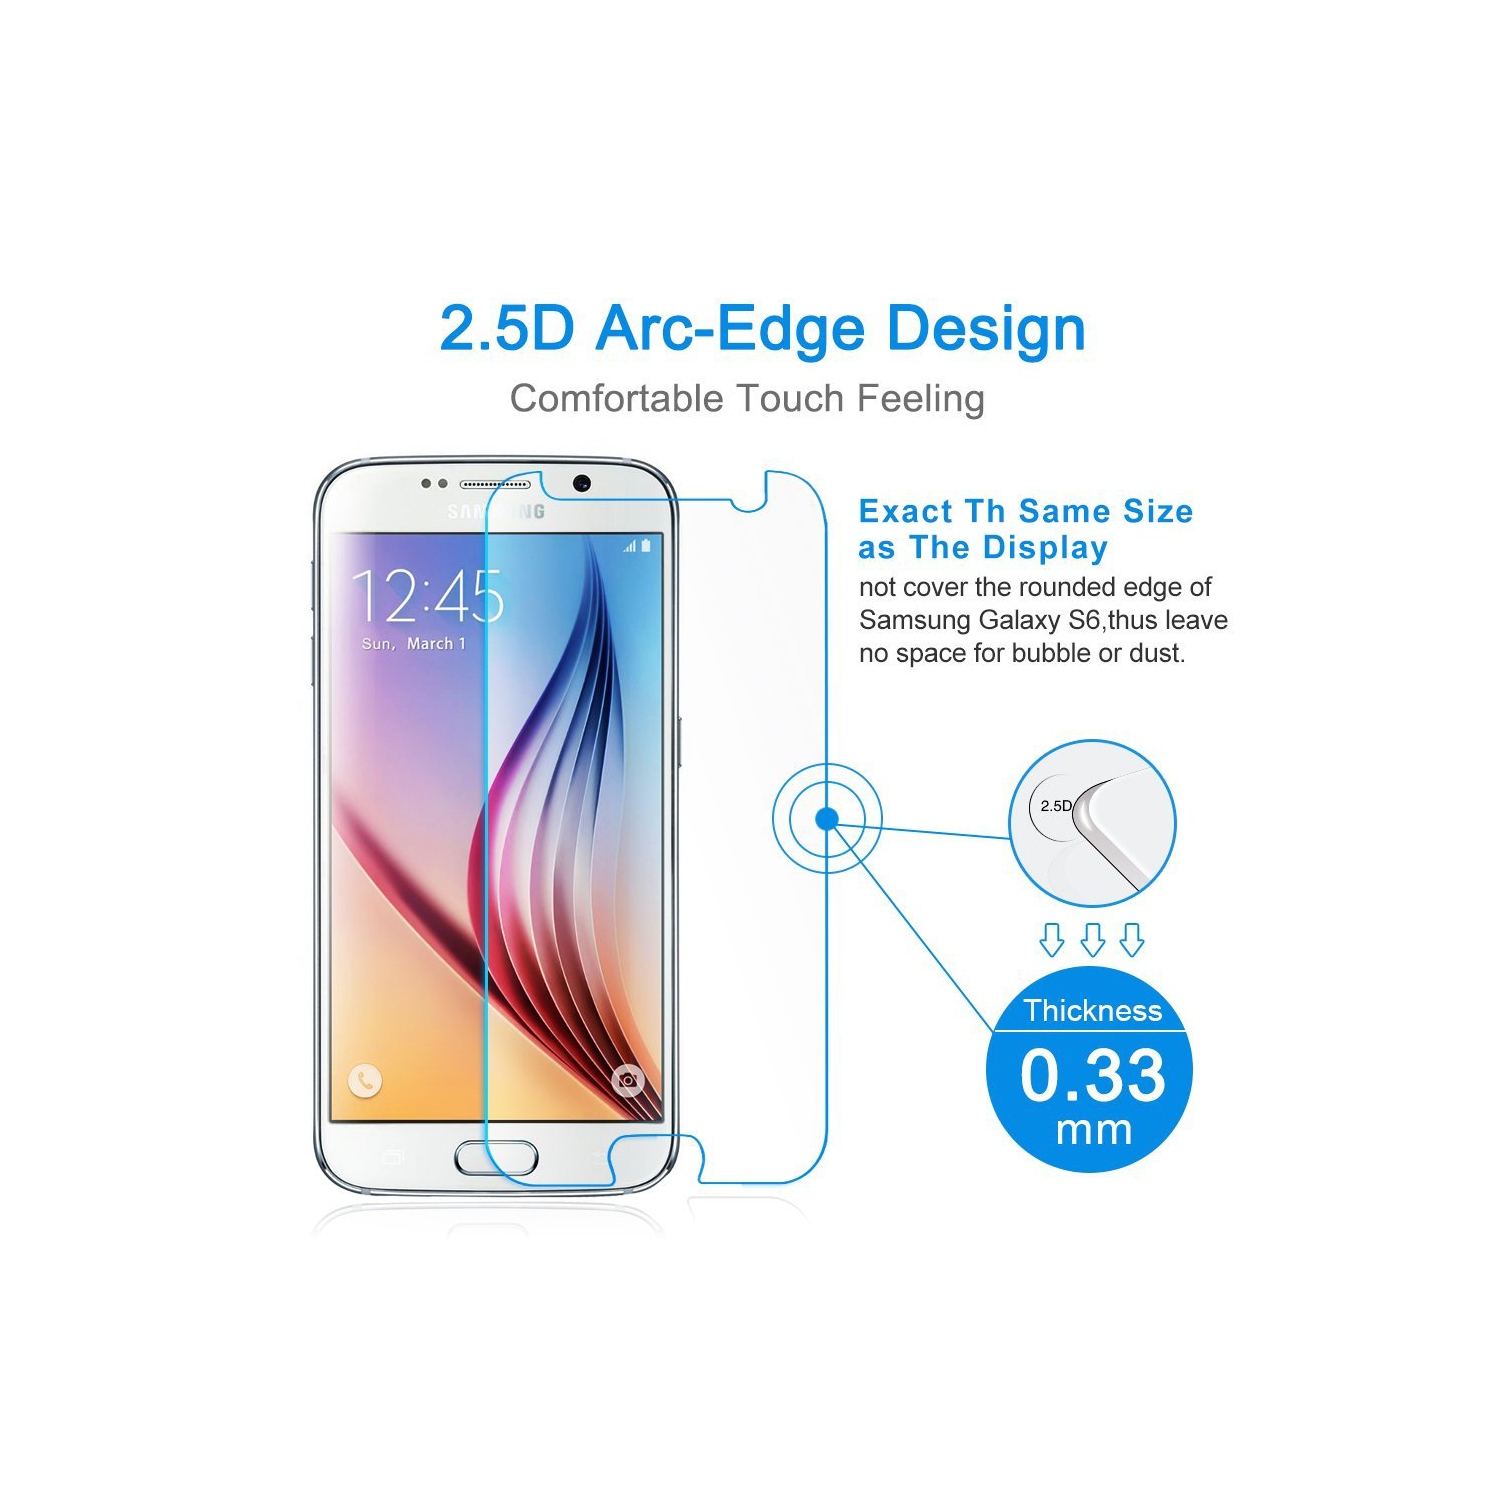 【2 Packs】 CSmart Premium Tempered Glass Screen Protector for Samsung Galaxy S6, Case Friendly & Bubble Free